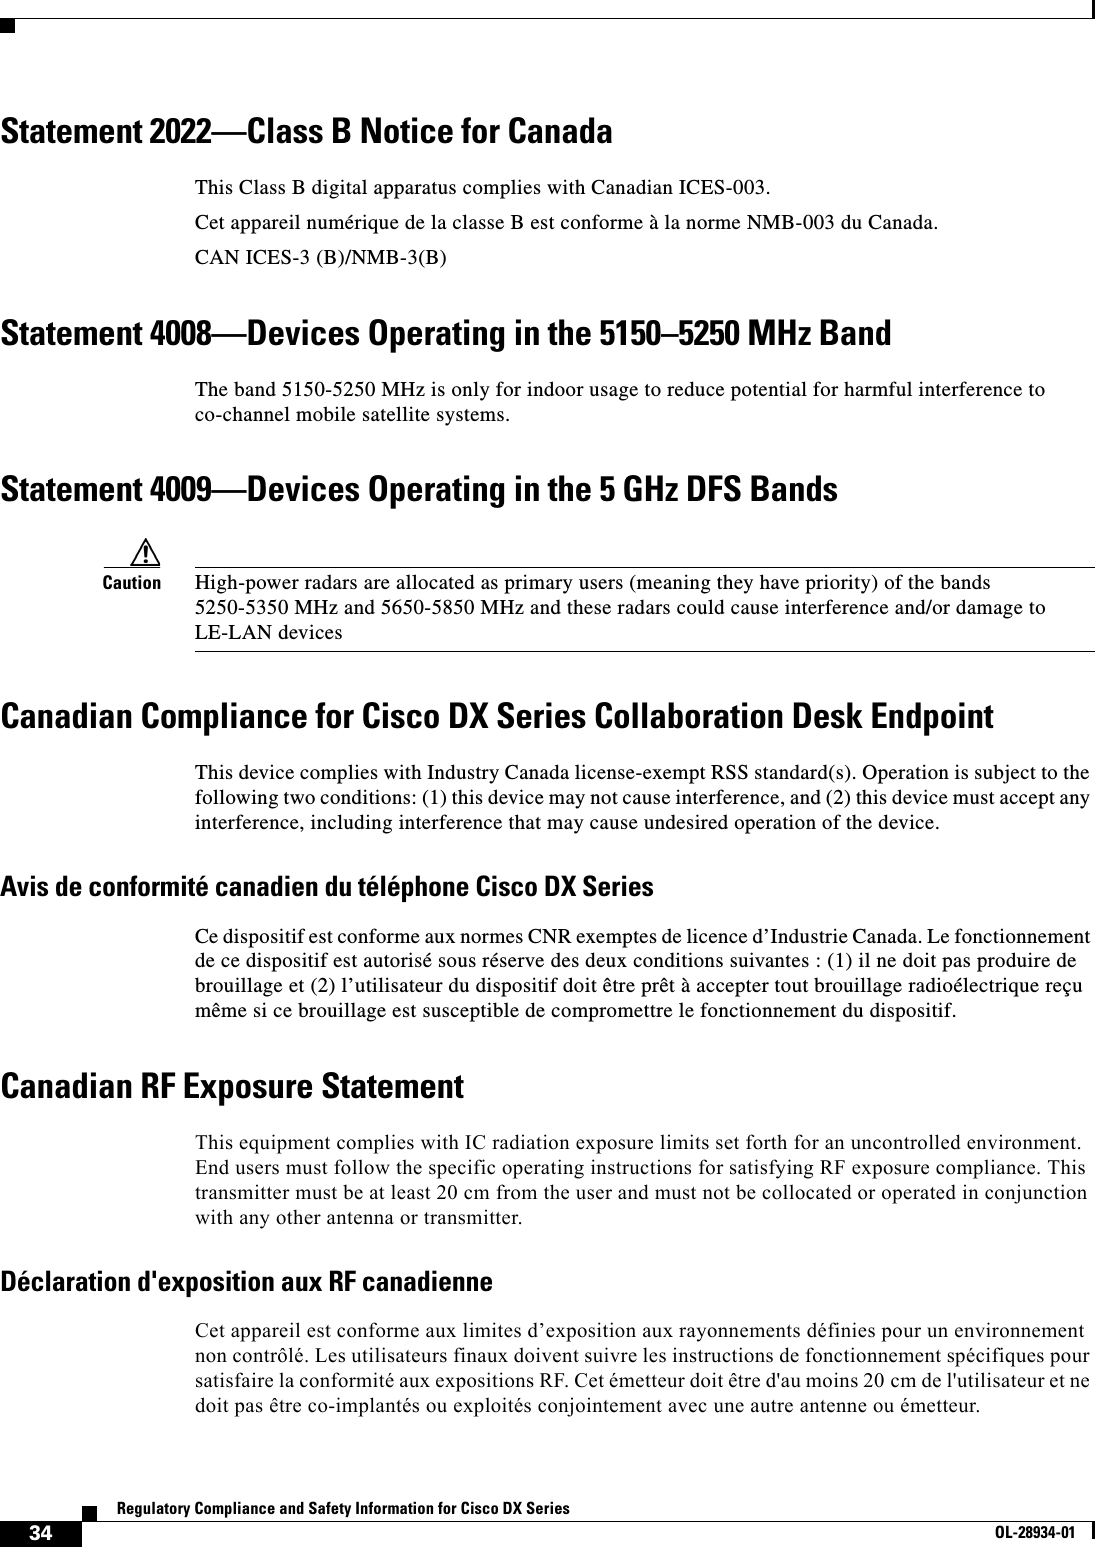  34Regulatory Compliance and Safety Information for Cisco DX SeriesOL-28934-01Statement 2022—Class B Notice for CanadaThis Class B digital apparatus complies with Canadian ICES-003.Cet appareil numérique de la classe B est conforme à la norme NMB-003 du Canada.CAN ICES-3 (B)/NMB-3(B)Statement 4008—Devices Operating in the 5150–5250 MHz BandThe band 5150-5250 MHz is only for indoor usage to reduce potential for harmful interference to co-channel mobile satellite systems.Statement 4009—Devices Operating in the 5 GHz DFS BandsCaution High-power radars are allocated as primary users (meaning they have priority) of the bands 5250-5350 MHz and 5650-5850 MHz and these radars could cause interference and/or damage to LE-LAN devicesCanadian Compliance for Cisco DX Series Collaboration Desk EndpointThis device complies with Industry Canada license-exempt RSS standard(s). Operation is subject to the following two conditions: (1) this device may not cause interference, and (2) this device must accept any interference, including interference that may cause undesired operation of the device.Avis de conformité canadien du téléphone Cisco DX SeriesCe dispositif est conforme aux normes CNR exemptes de licence d’Industrie Canada. Le fonctionnement de ce dispositif est autorisé sous réserve des deux conditions suivantes : (1) il ne doit pas produire de brouillage et (2) l’utilisateur du dispositif doit être prêt à accepter tout brouillage radioélectrique reçu même si ce brouillage est susceptible de compromettre le fonctionnement du dispositif.Canadian RF Exposure StatementThis equipment complies with IC radiation exposure limits set forth for an uncontrolled environment. End users must follow the specific operating instructions for satisfying RF exposure compliance. This transmitter must be at least 20 cm from the user and must not be collocated or operated in conjunction with any other antenna or transmitter.Déclaration d&apos;exposition aux RF canadienneCet appareil est conforme aux limites d’exposition aux rayonnements définies pour un environnement non contrôlé. Les utilisateurs finaux doivent suivre les instructions de fonctionnement spécifiques pour satisfaire la conformité aux expositions RF. Cet émetteur doit être d&apos;au moins 20 cm de l&apos;utilisateur et ne doit pas être co-implantés ou exploités conjointement avec une autre antenne ou émetteur.